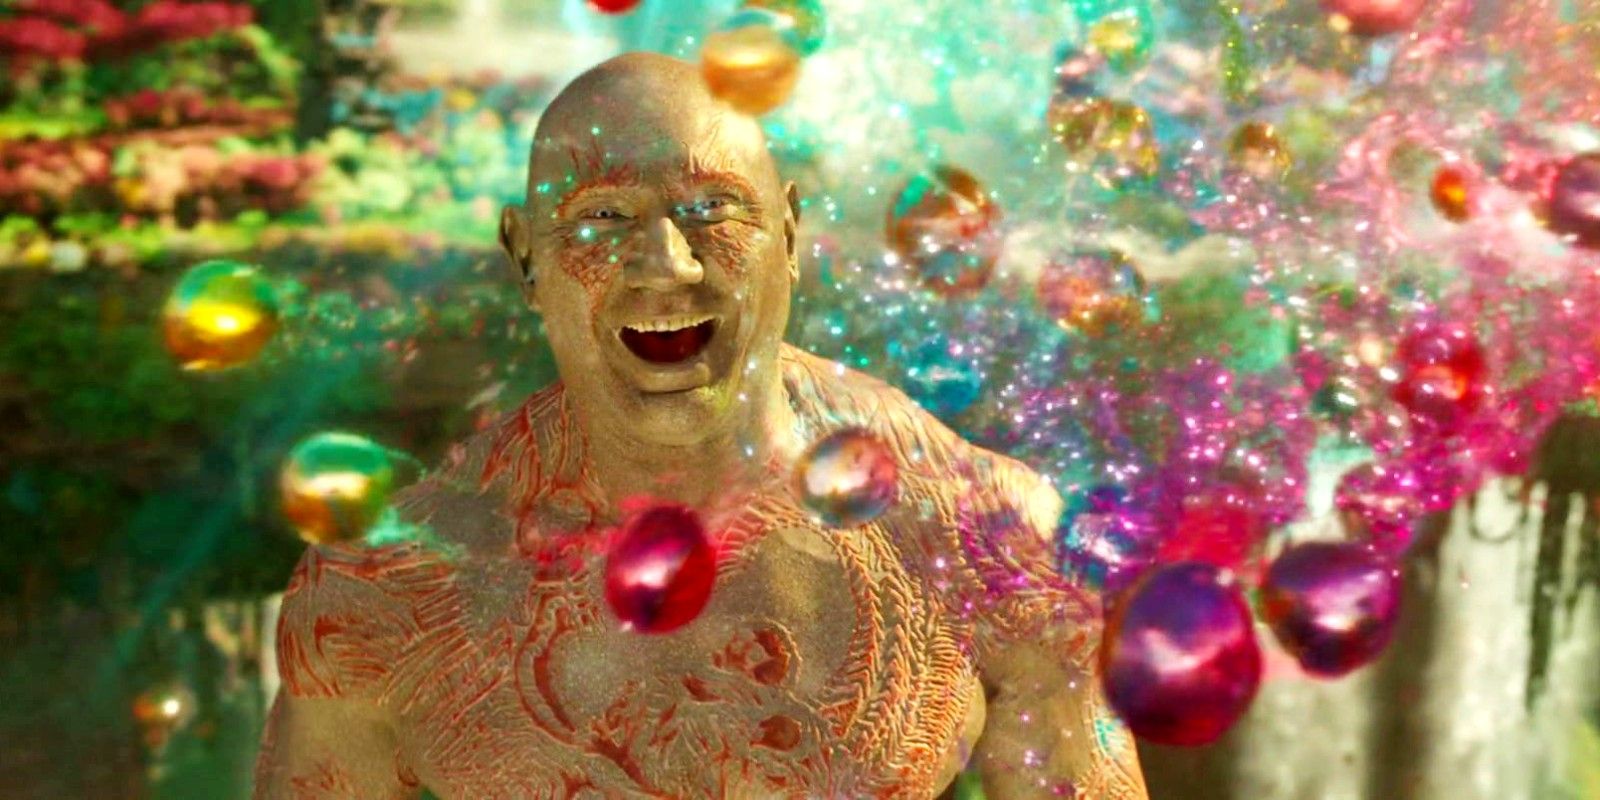 Dave Bautista as Drax in Guardians of the Galaxy 2